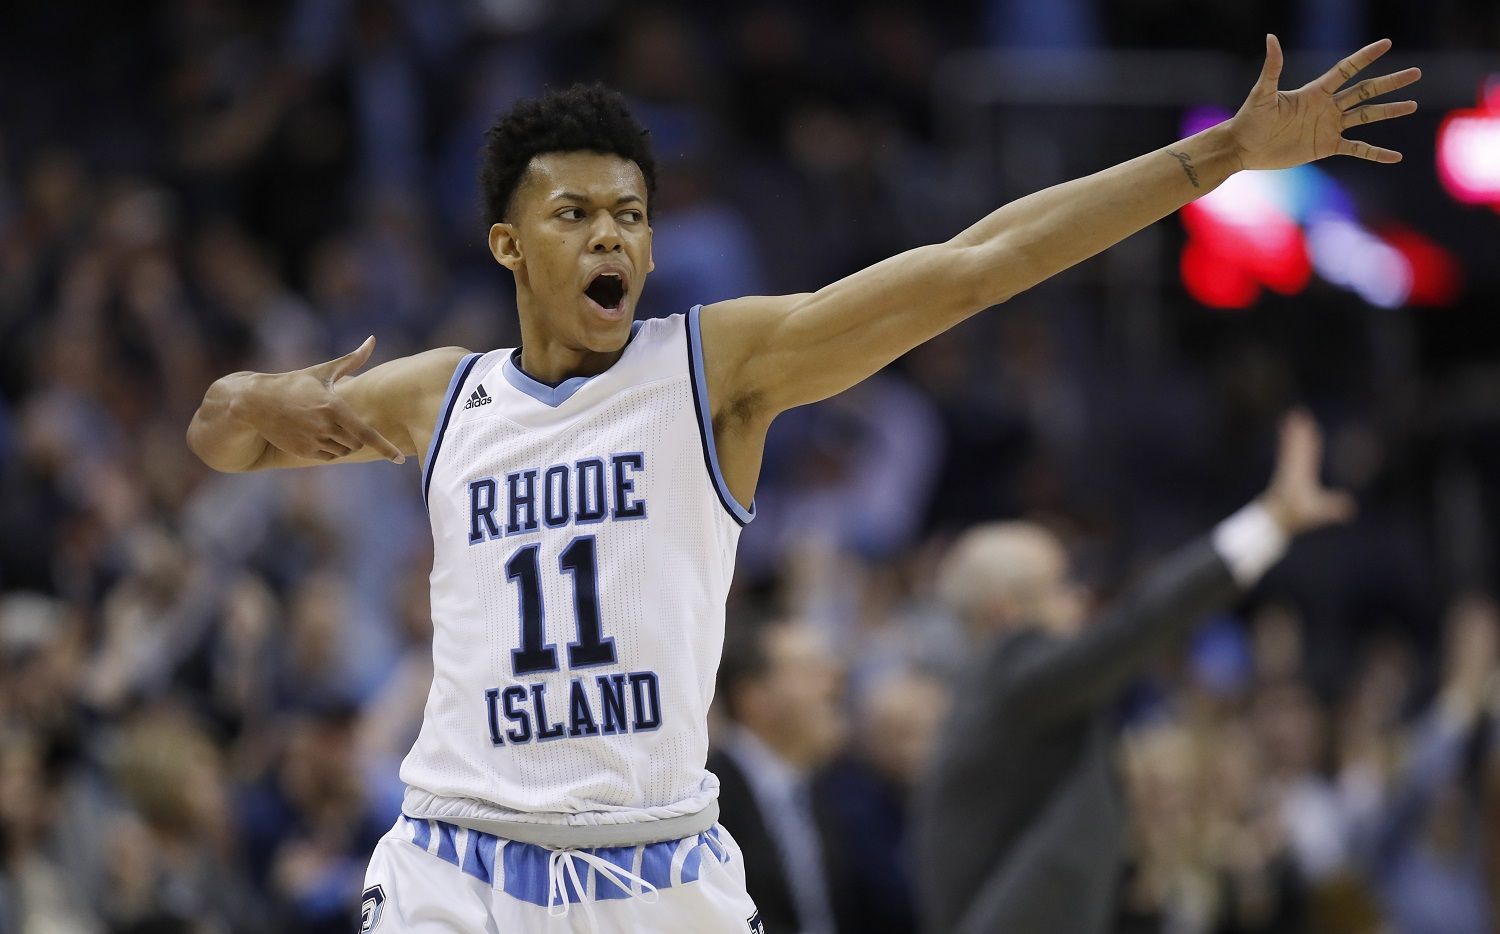 Rhode Island guard Jeff Dowtin celebrates his 3-point shot during the second half of an NCAA college basketball game against Saint Joseph's in the semifinals of the Atlantic 10 Conference tournament, Saturday, March 10, 2018, in Washington. Rhode Island won 90-87. (AP Photo/Alex Brandon)